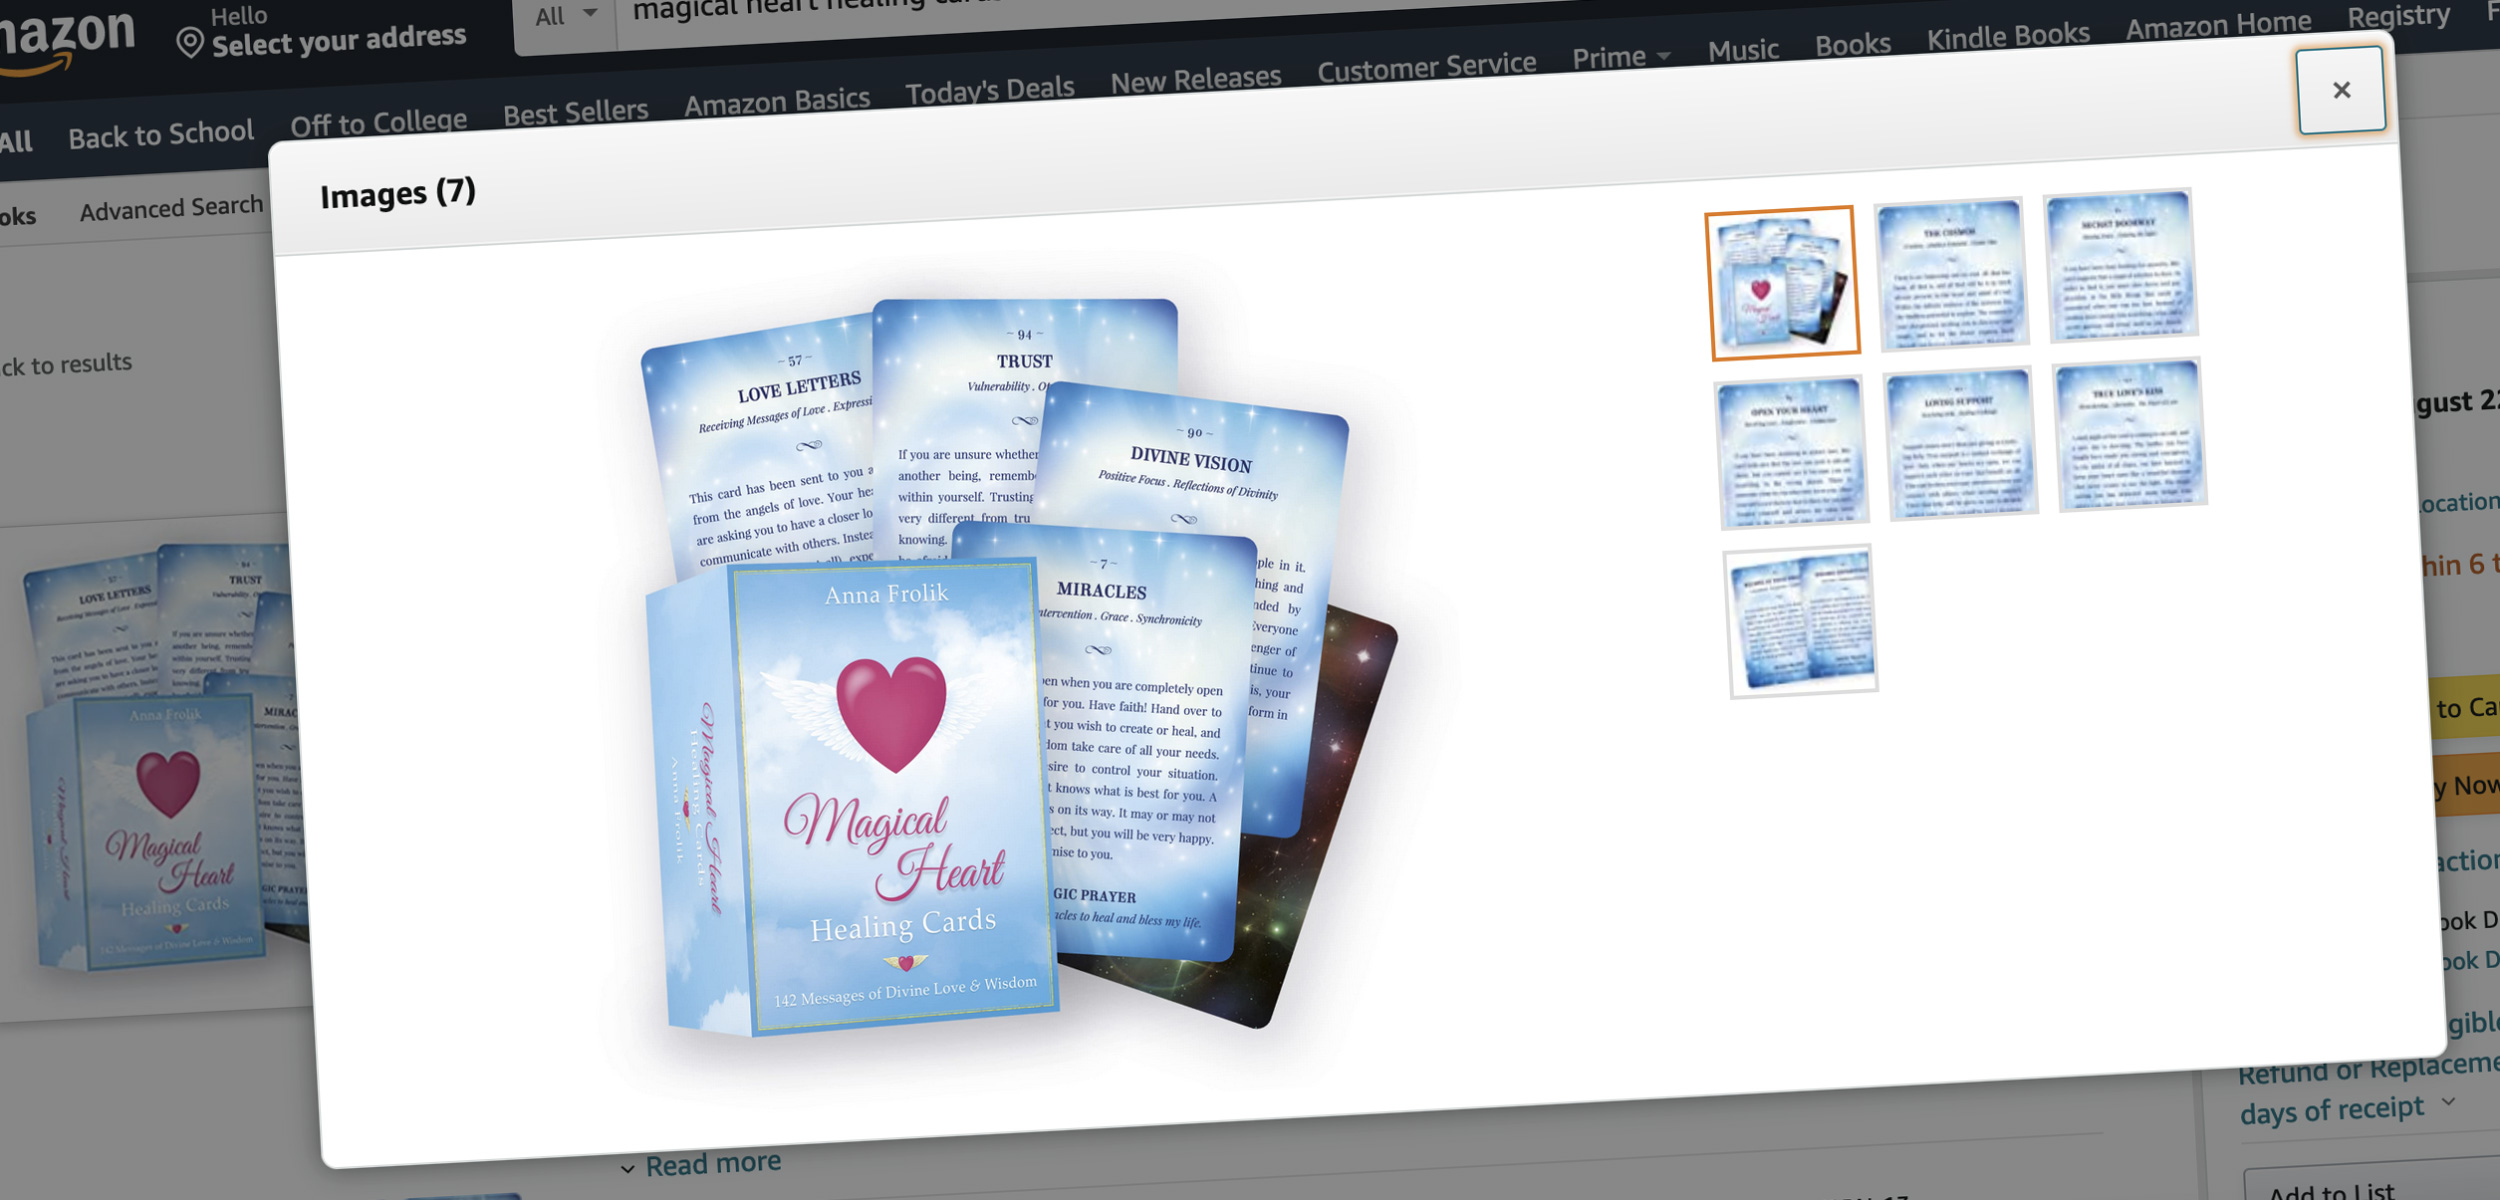 Magical Heart Healing Cards (Amazon Listing)